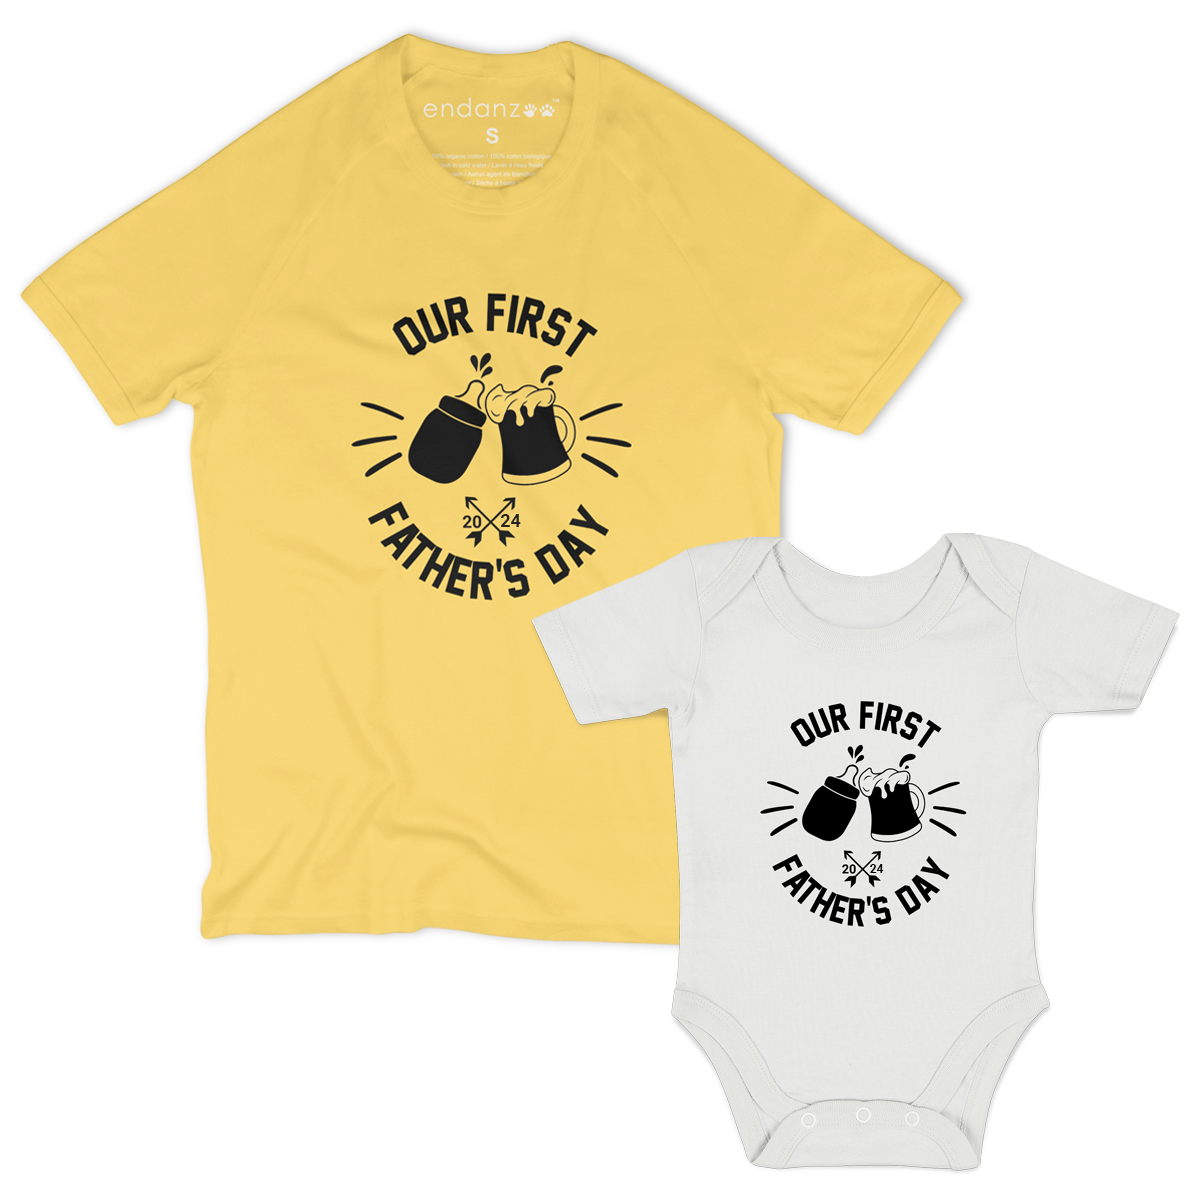 Matching Dad & Baby Organic Outfits - First Father's Day (Drinking Buddies)